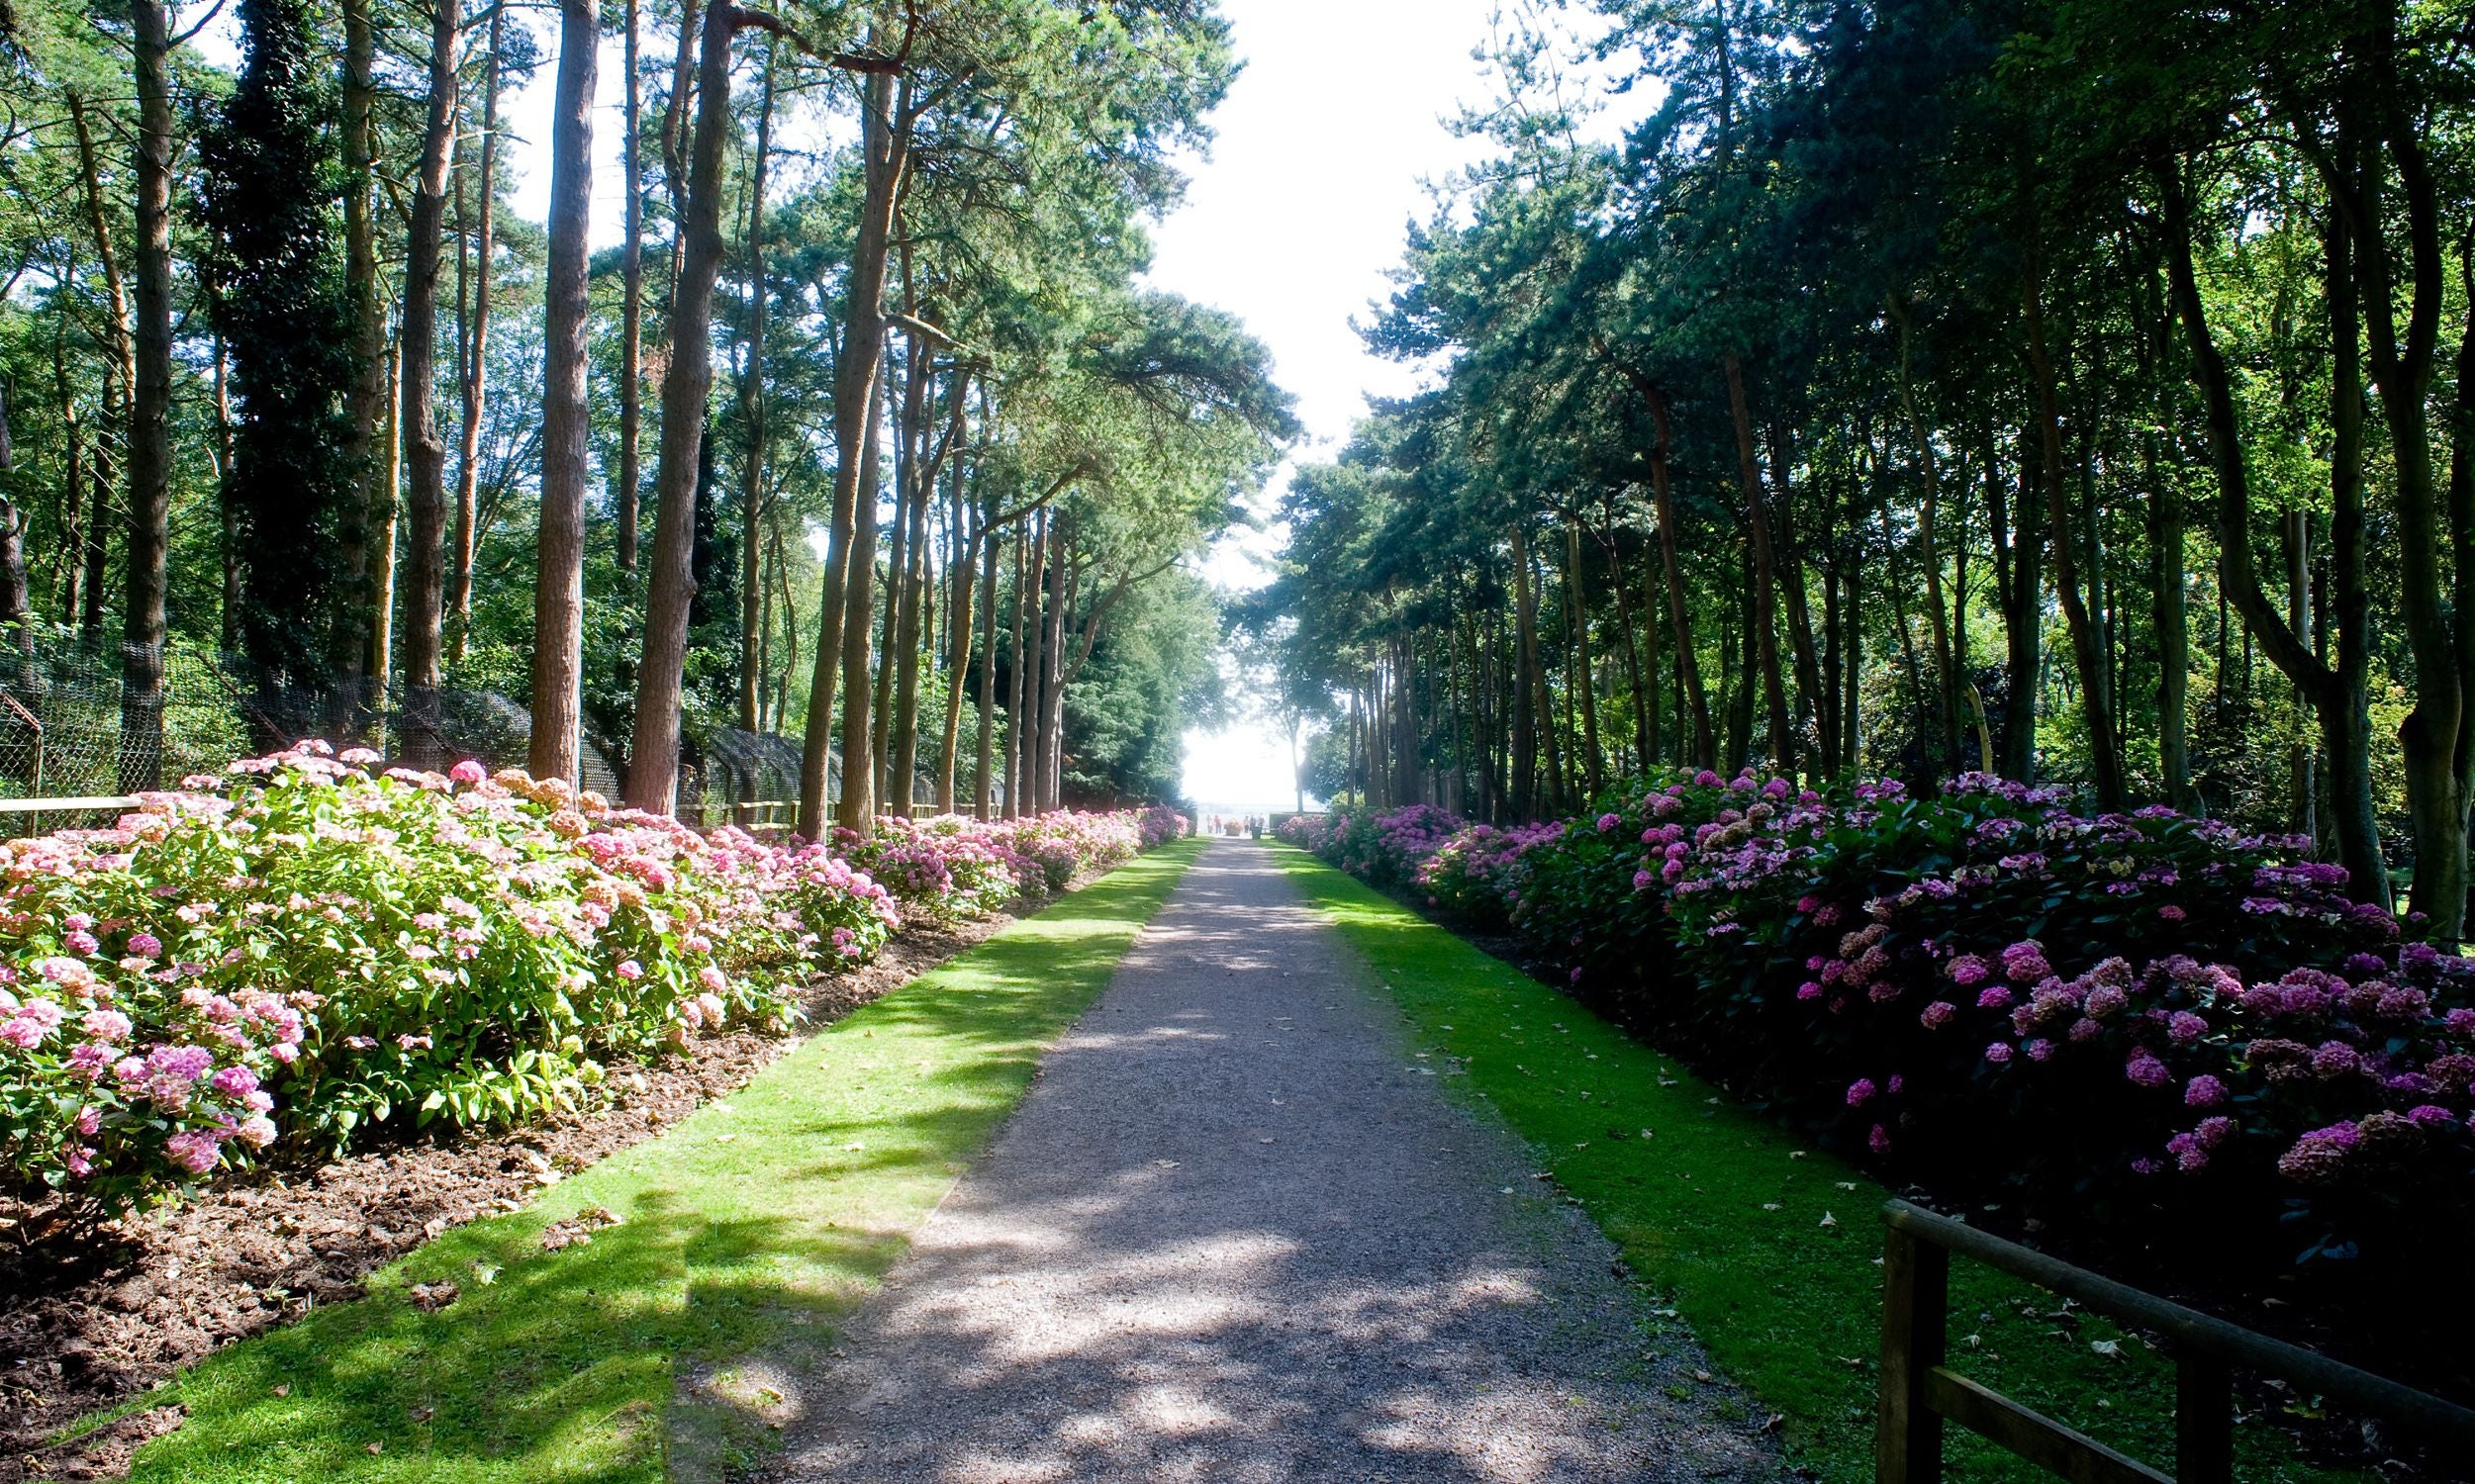 The reserves boasts views stretching across 600 acres of private parkland and garden grounds